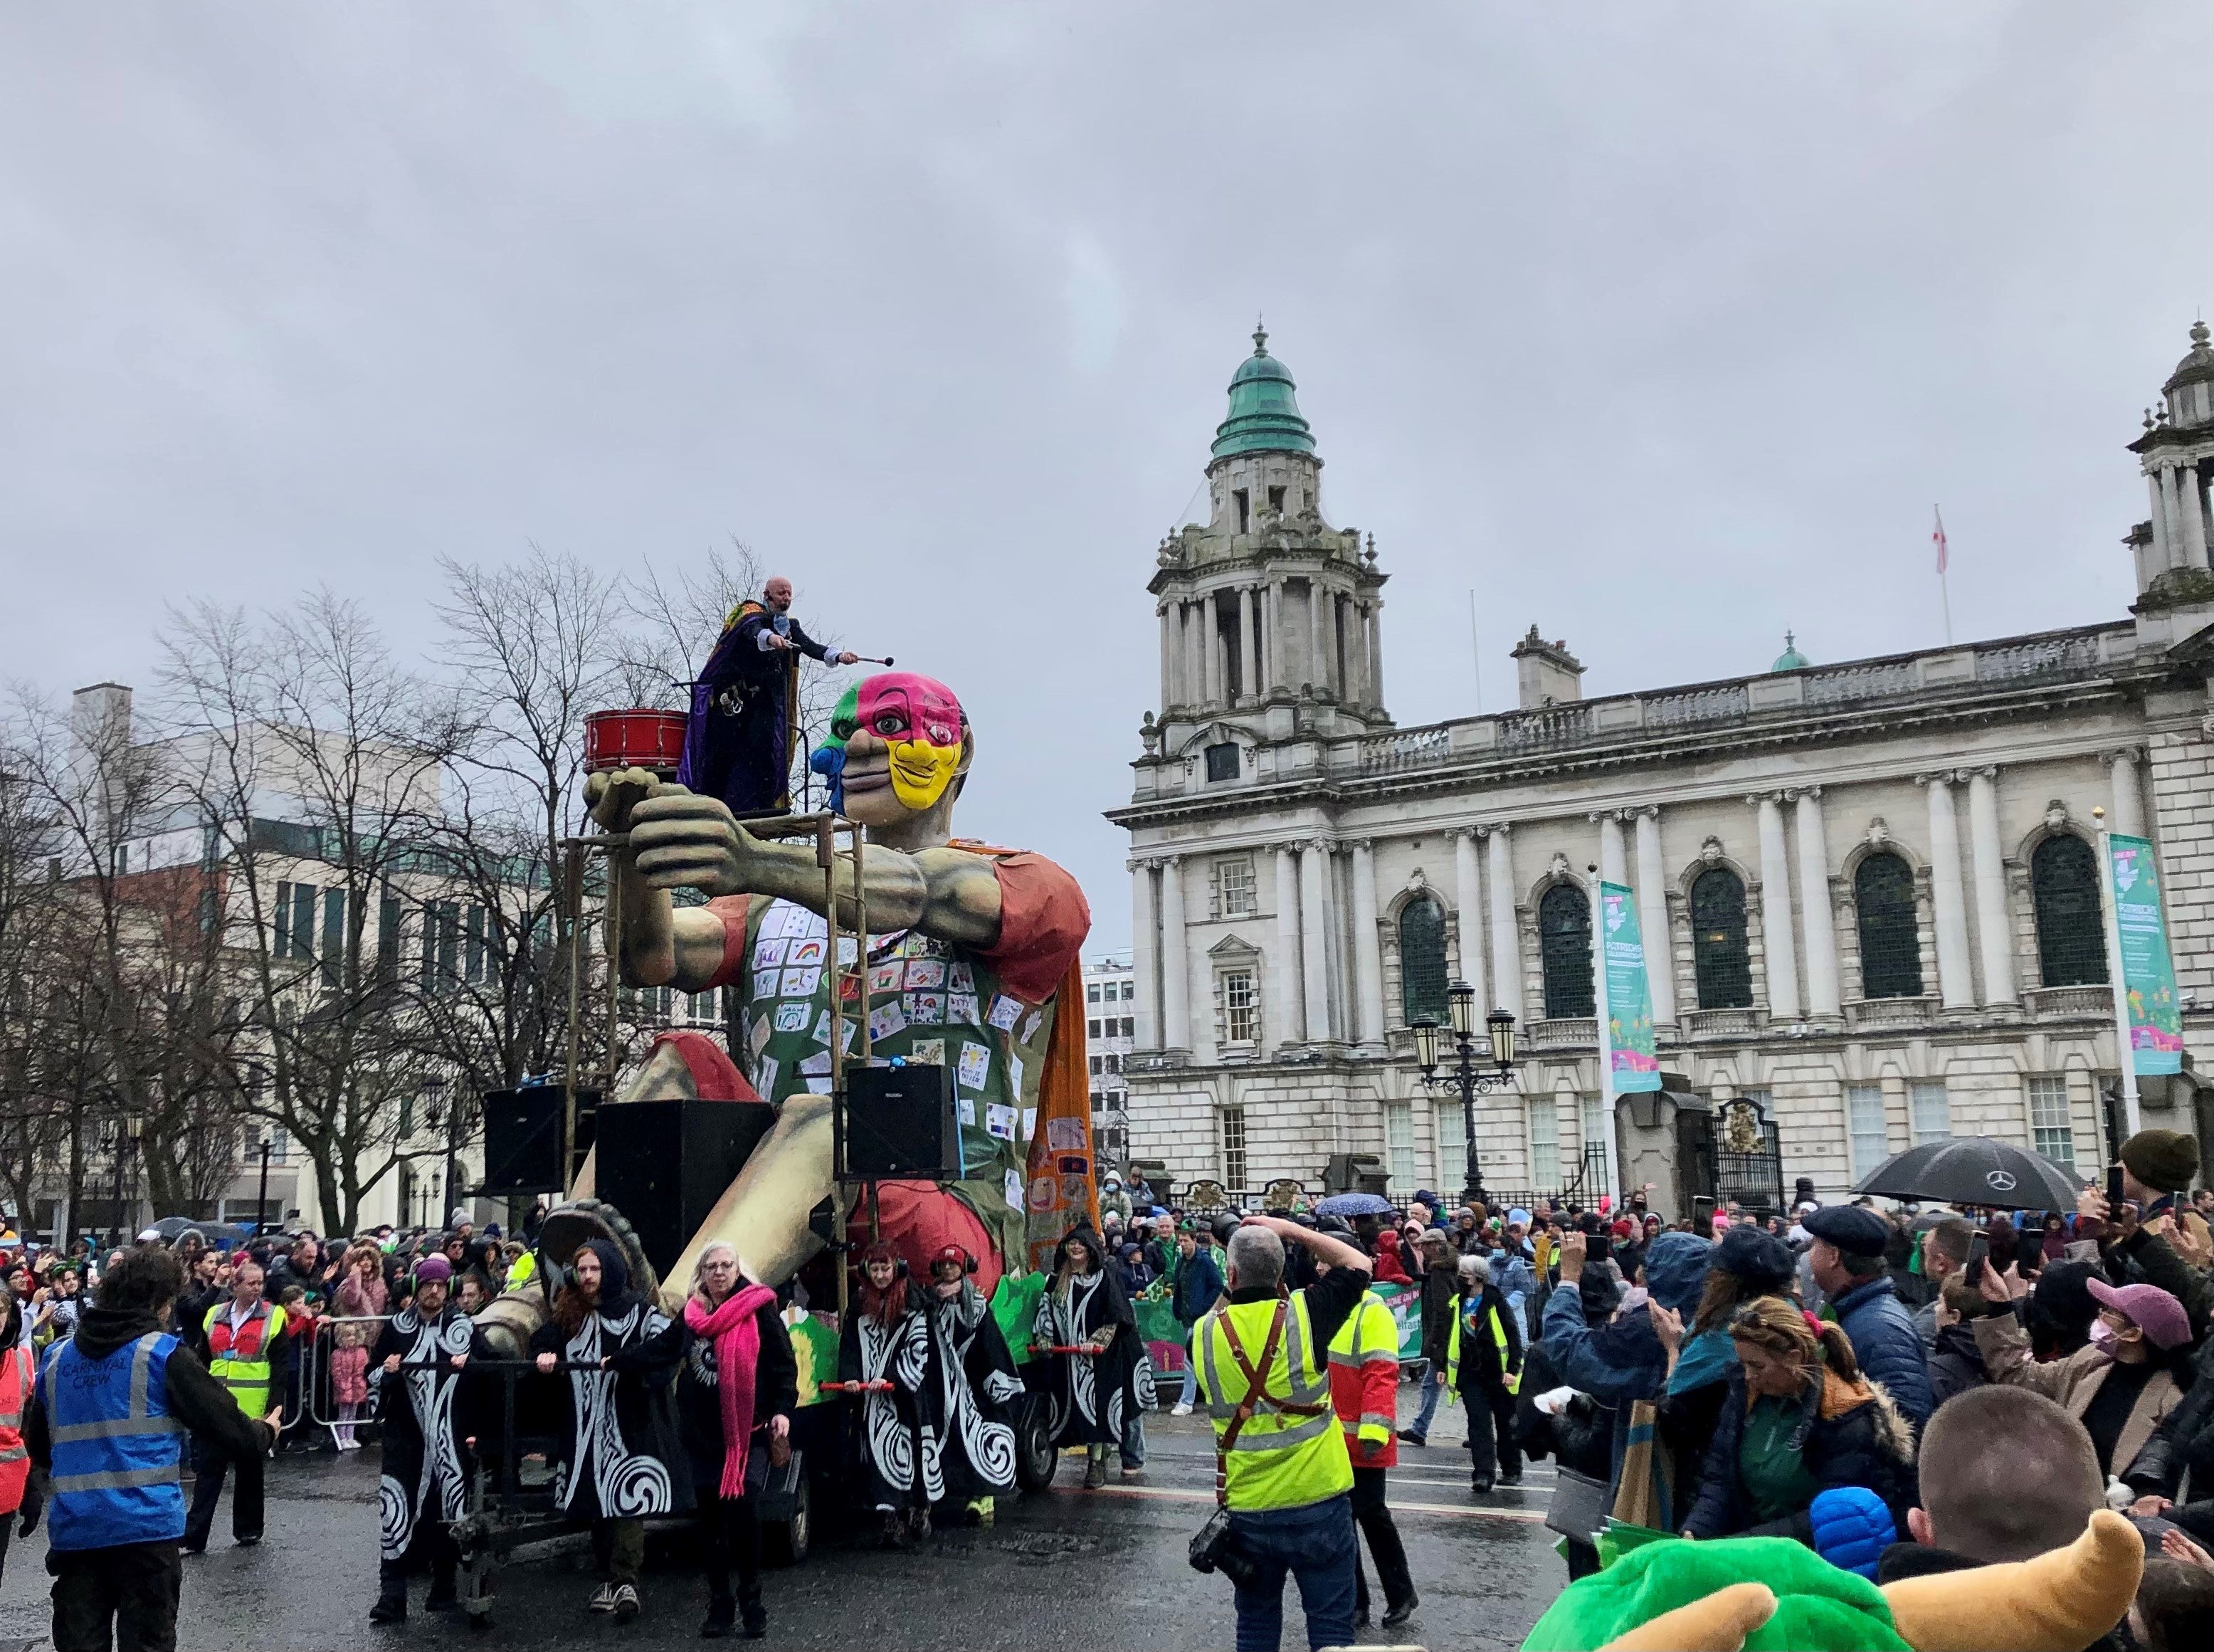 Rain failed to dampen spirits in Belfast as the St Patrick’s Day parade returned to the city after a three-year absenc (David Young/PA)